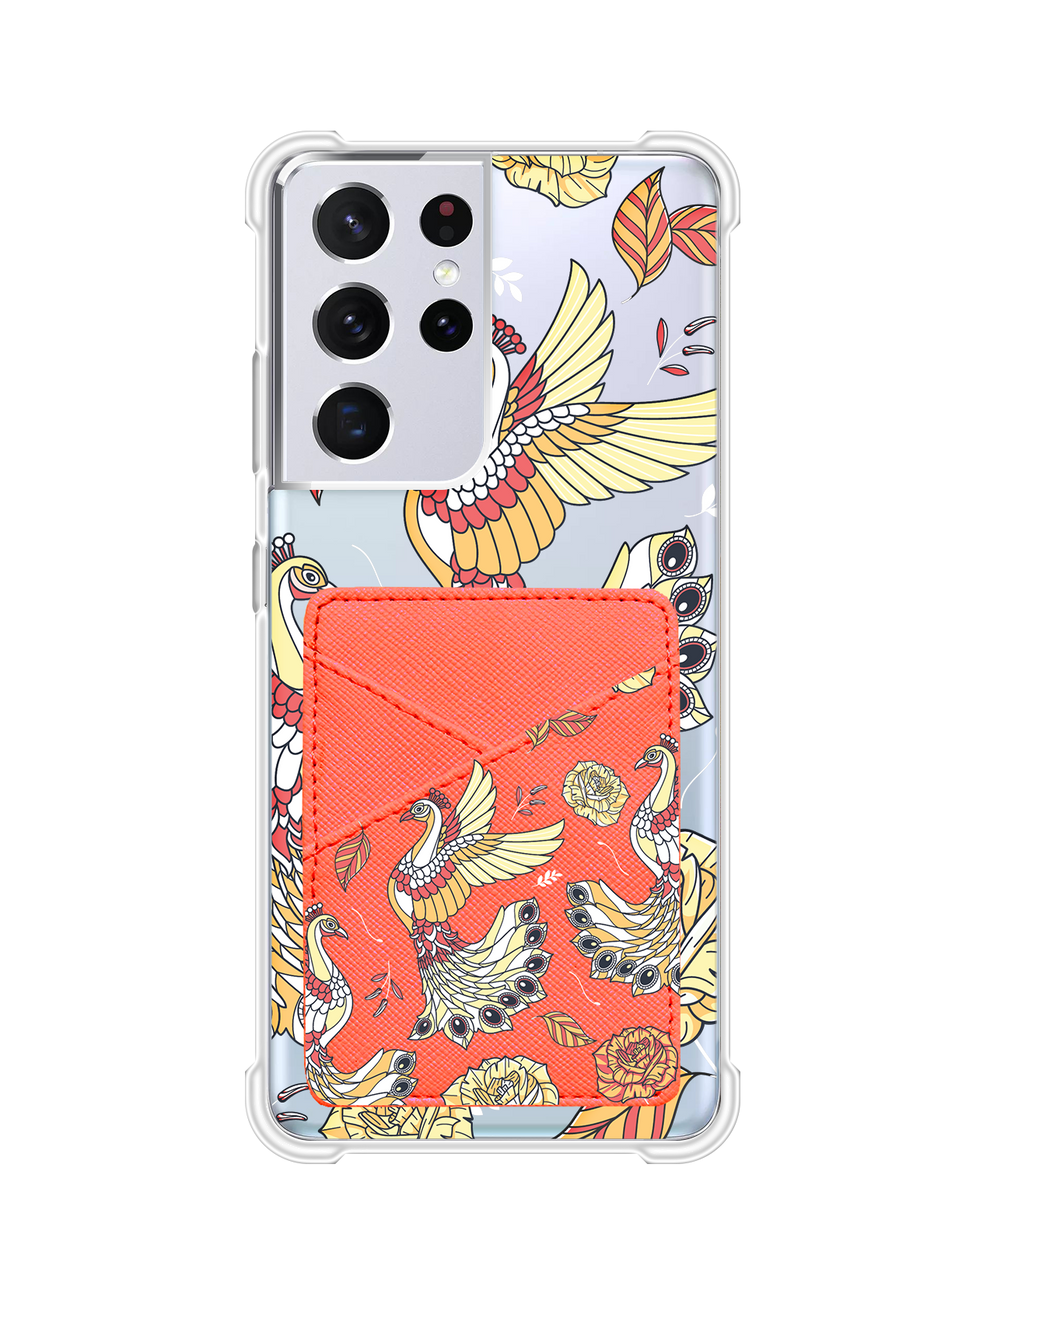 Android Phone Wallet Case - Bird of Paradise 5.0